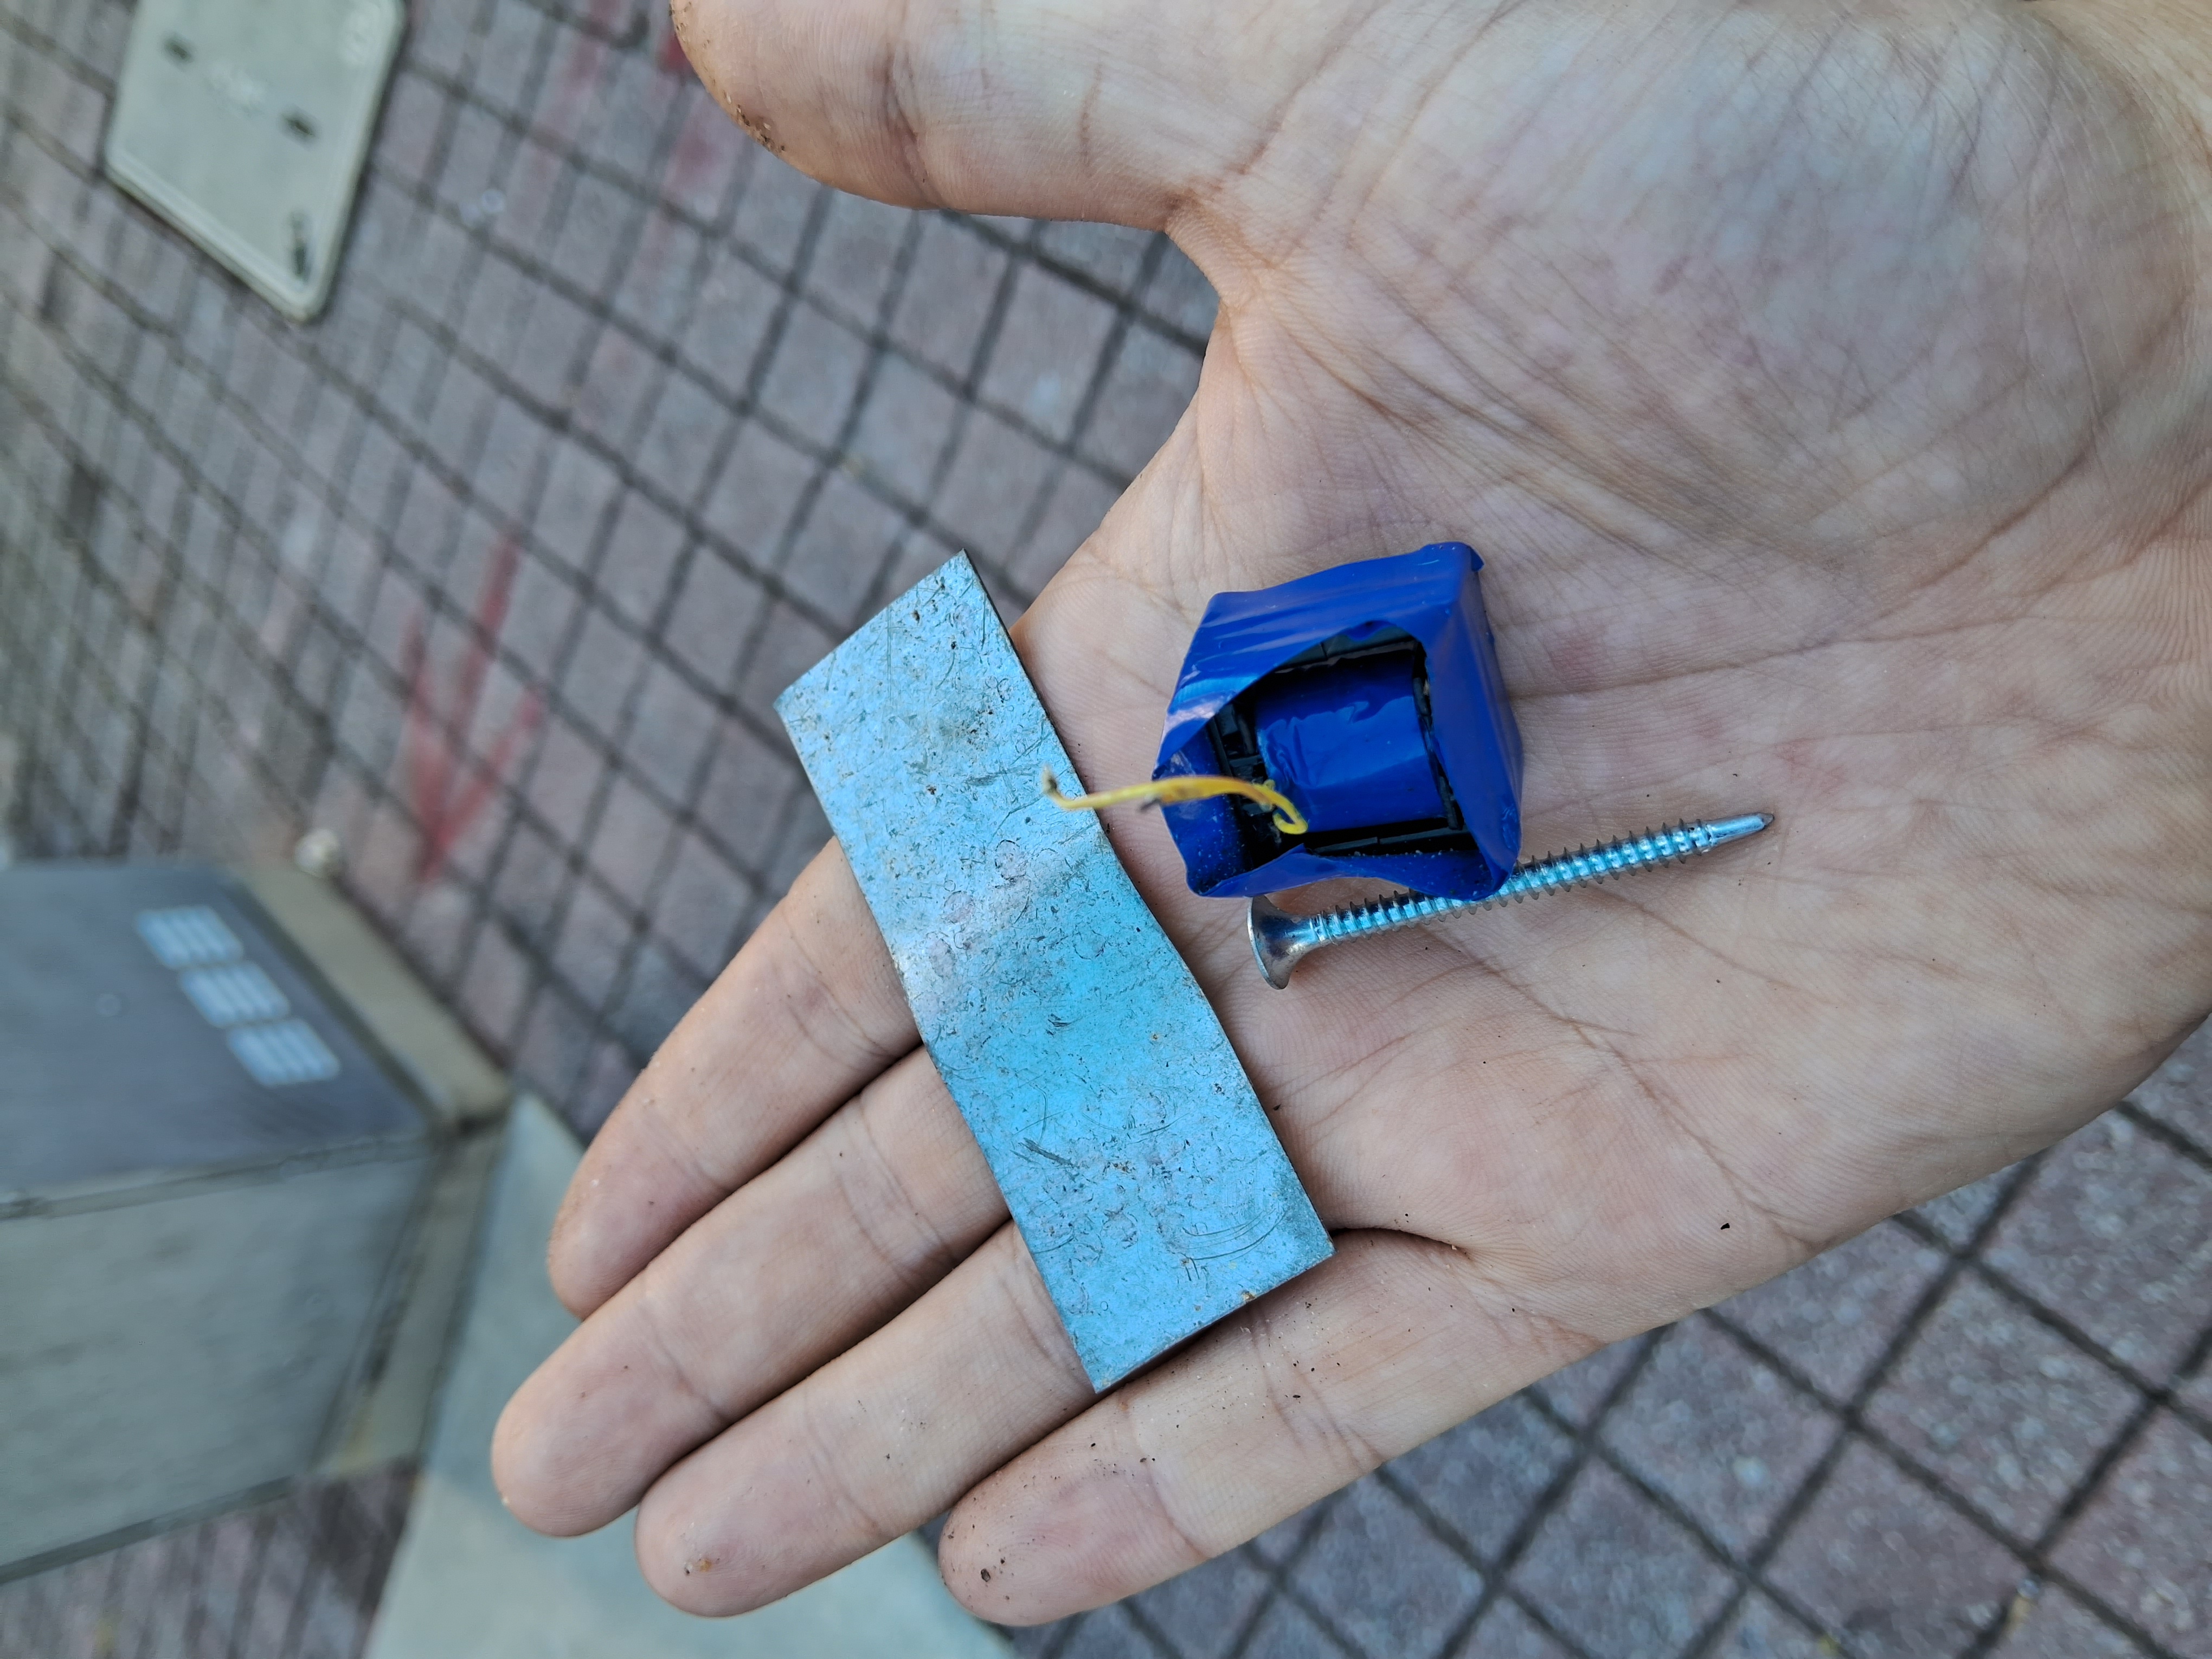 Scavenged metal in my hand